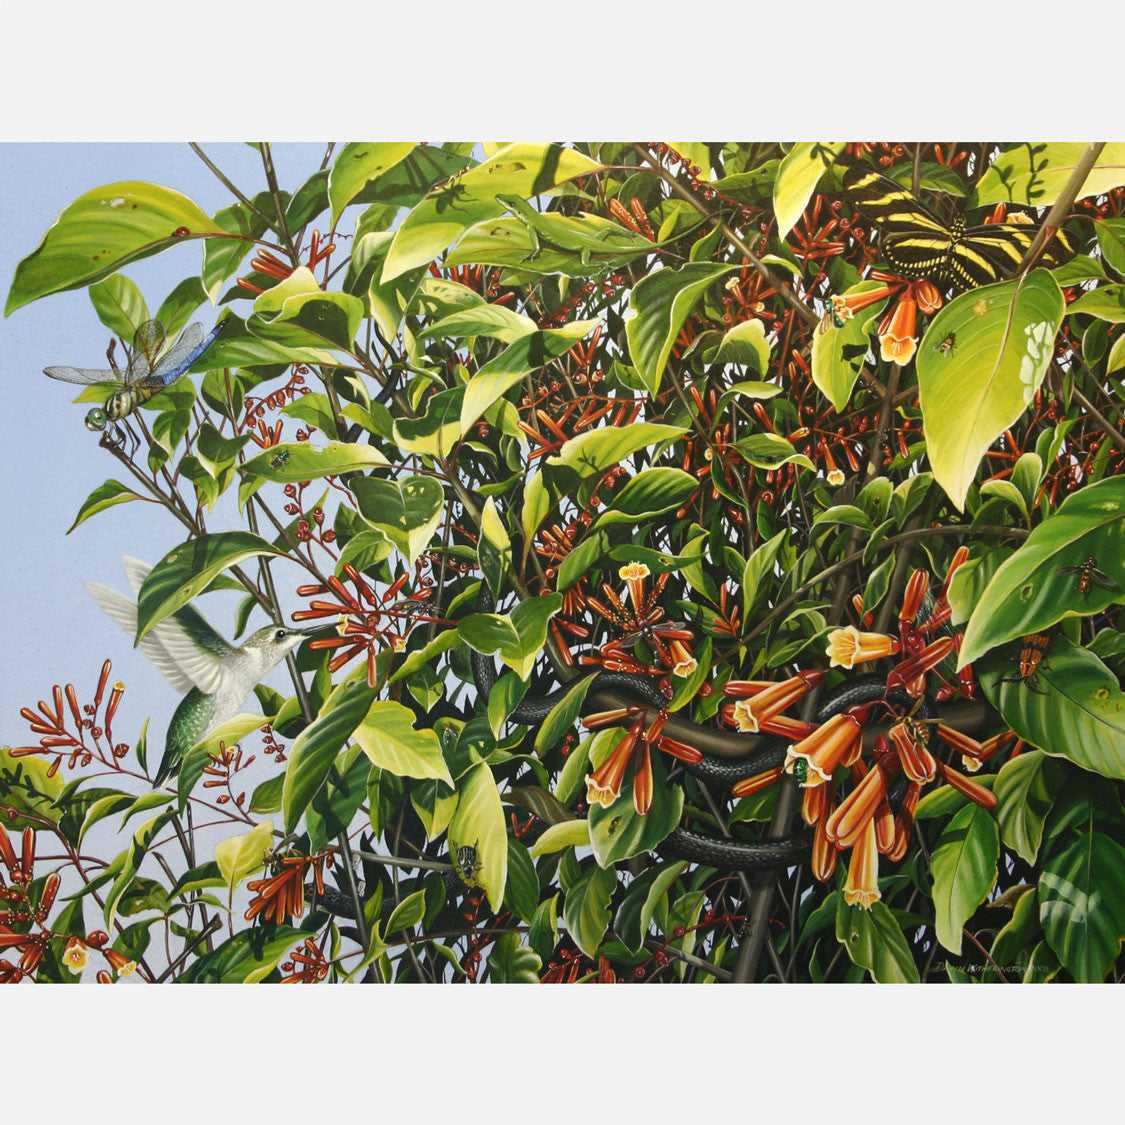 This beautiful illustration of a firebush, Hamelia patens, and the life this large bush attracts is biologically accurate in detail.